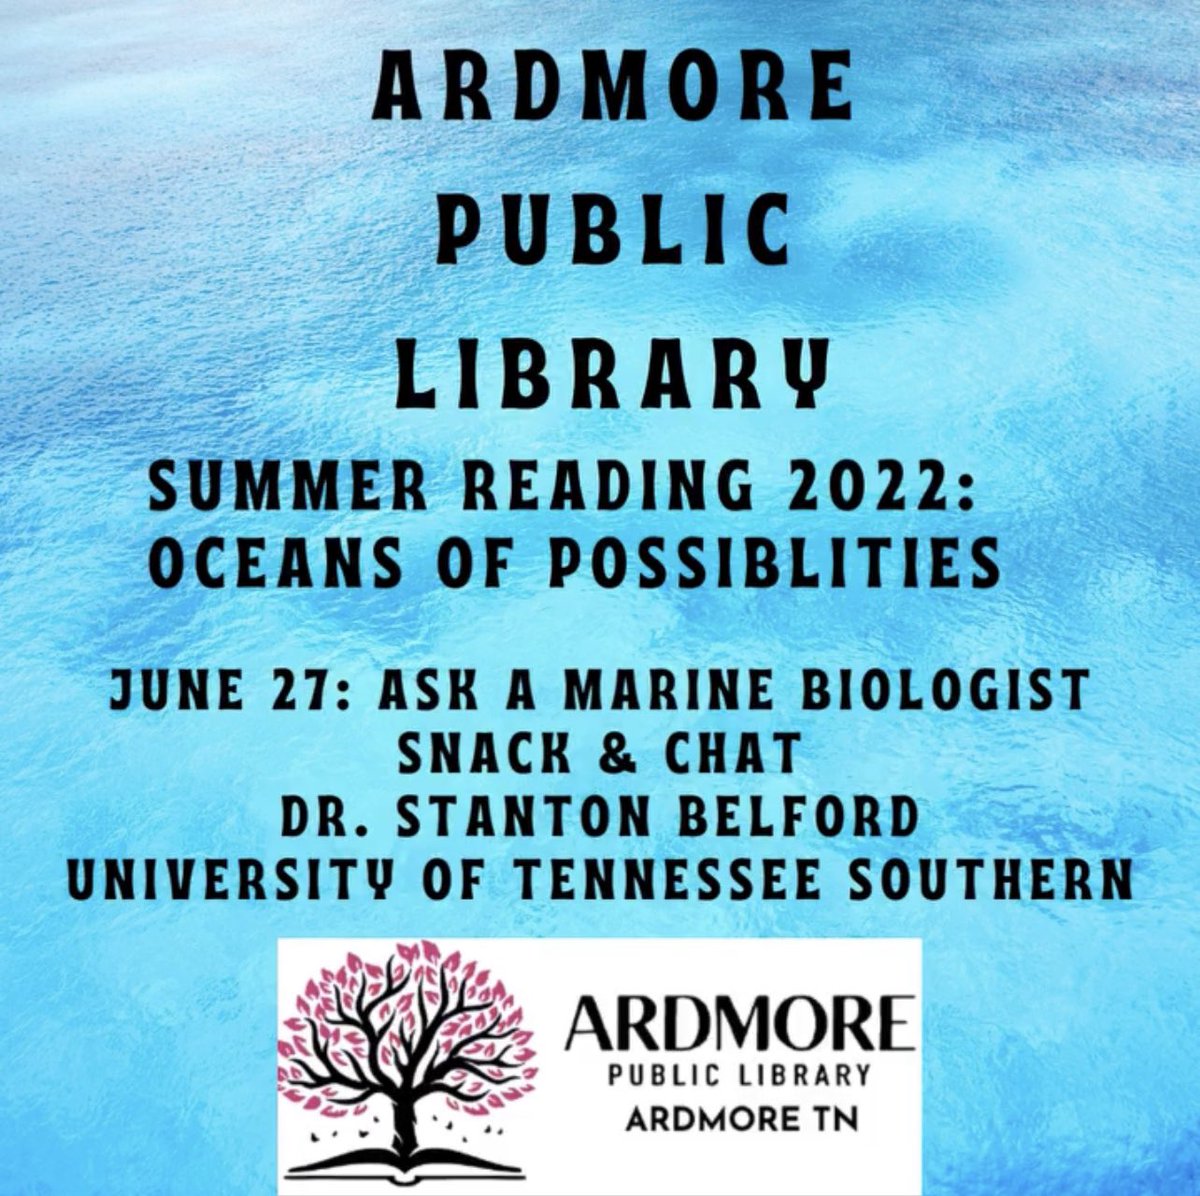 Sharing marine biology with the local libraries #Ardmore #MarineScience